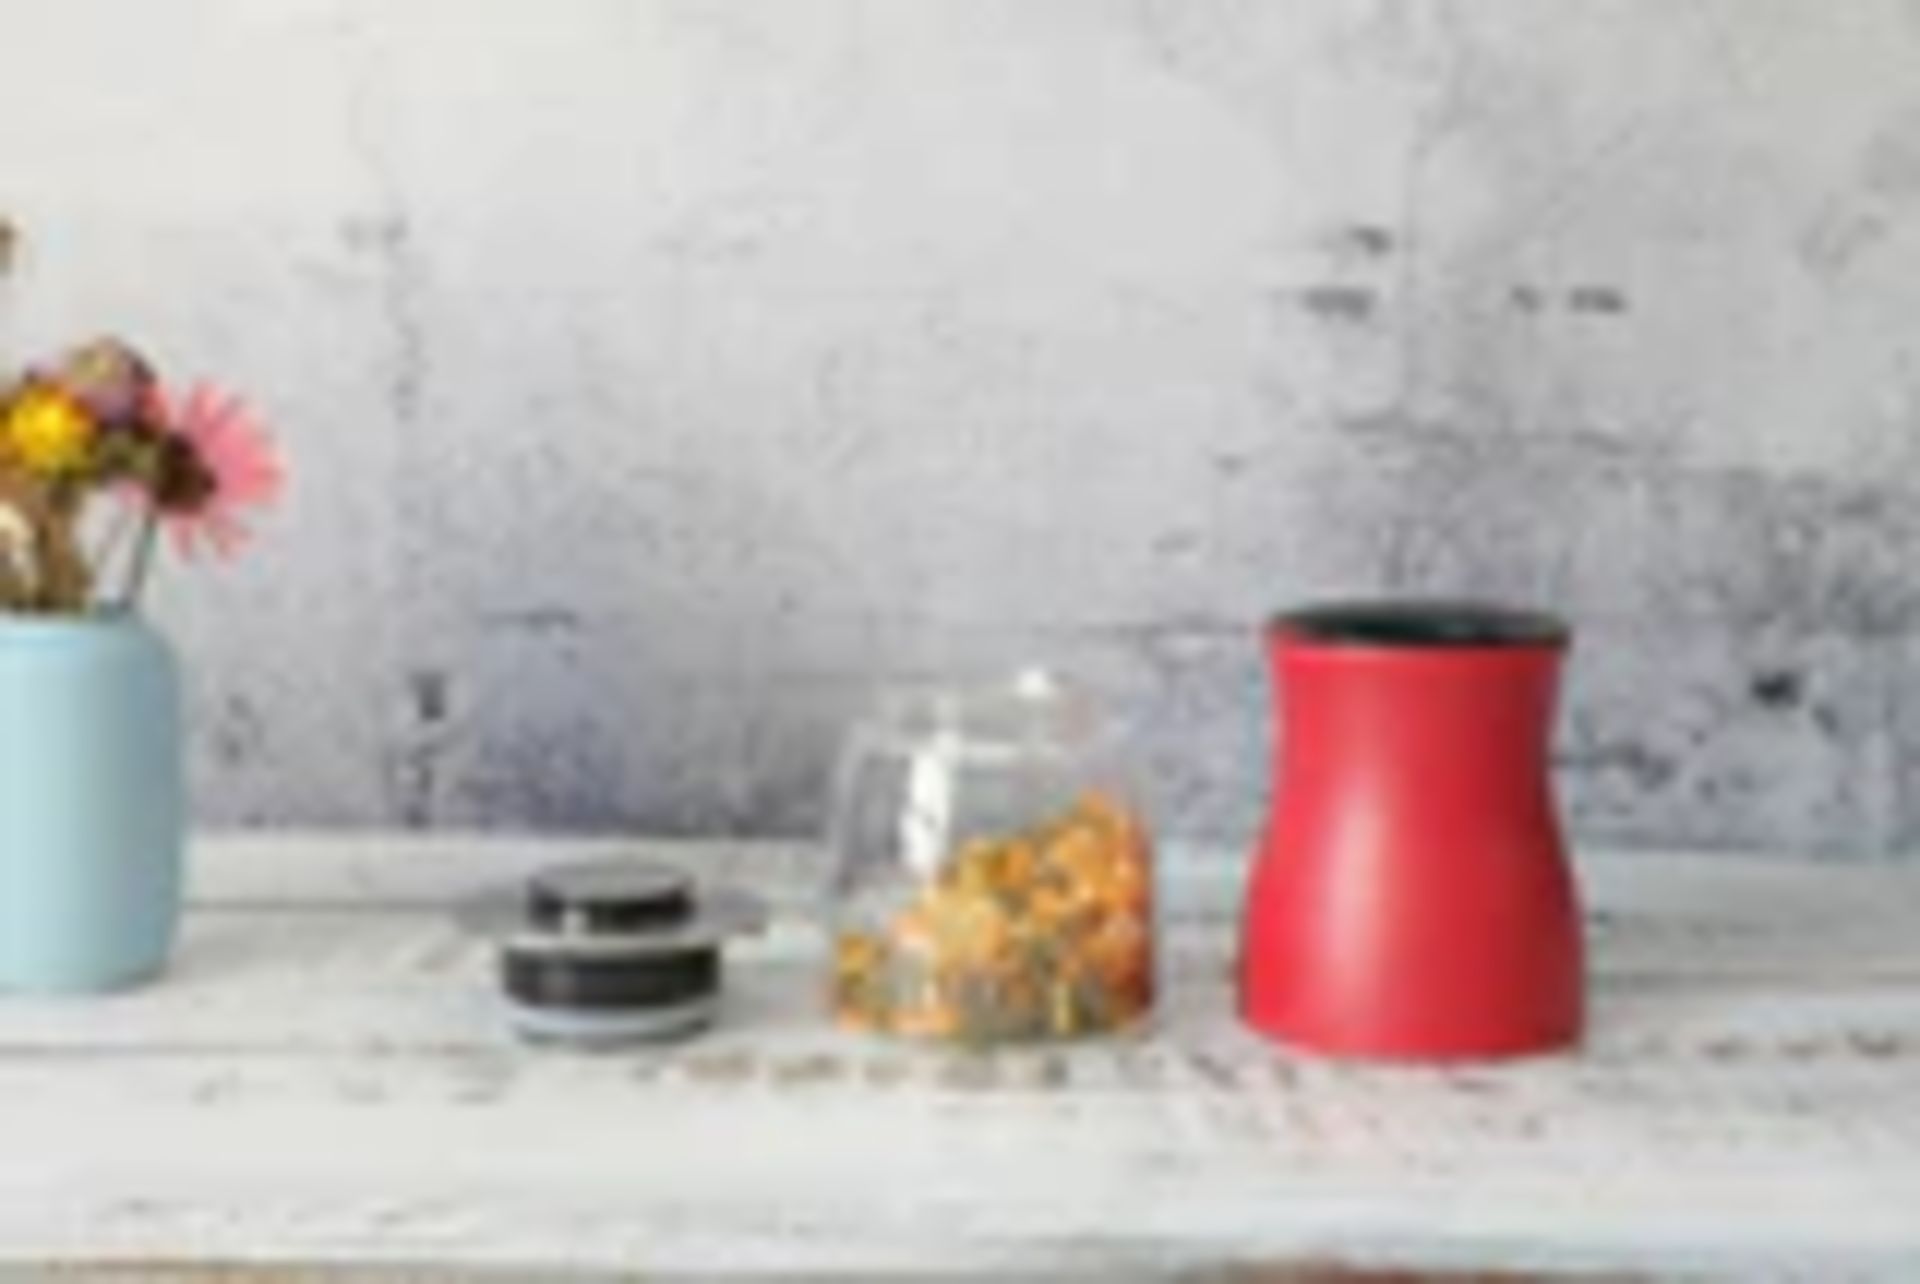 Brand New 3 PC Kitchen Canisters Red - Image 2 of 2